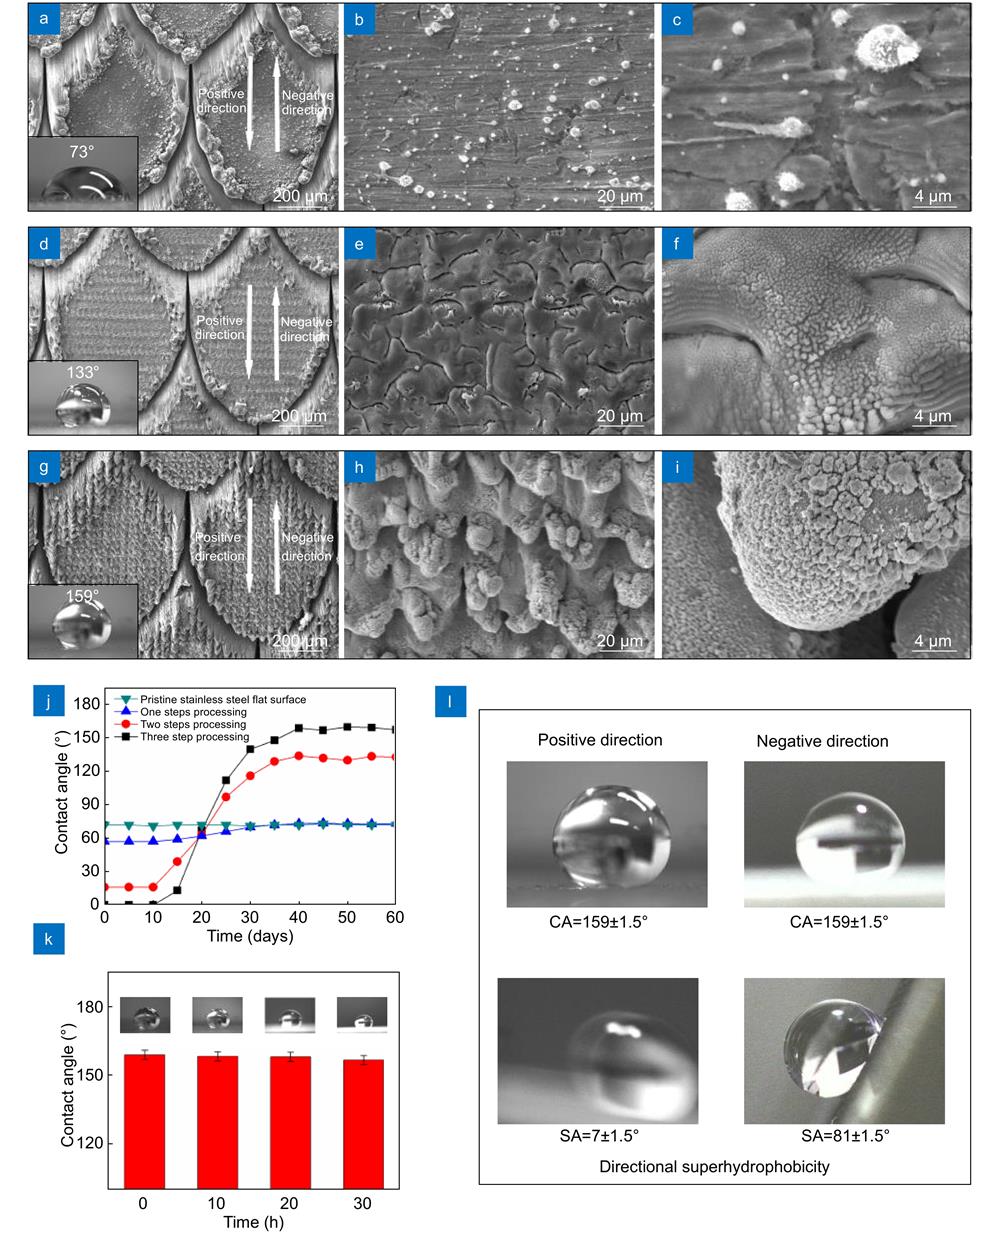 Micro/nanostructures, and wetting behavior of the superhydrophobic surfaces with different hierarchical structures by different steps of the laser processing. (a) SEM images of the hierarchical structures of the snake scale-like array by one step laser processing; the inset shows that the CA of the water droplet is 73°. (b, c) SEM images of (a) at different magnified scales. (d) SEM images of the hierarchical structures of the snake scale-like array by two steps laser processing; the inset shows that the CA of the water droplet is 133°. (e, f) SEM images corresponding to (d) at different magnified scales. (g) SEM images of the hierarchical structures of the snake scale-like array by three steps laser processing; the inset shows that the CA of the water droplet is 159°. (h, i) SEM images corresponding to (g) at different magnified scales. (j) Time-dependence of CAs for the hierarchical surfaces by different steps laser processing exposed to air. (k) Superhydrophilicity of the complete three-level hierarchical surfaces in 30 h. (l) Wetting results (CAs and SAs) on the surface corresponding to opposite directions, respectively.